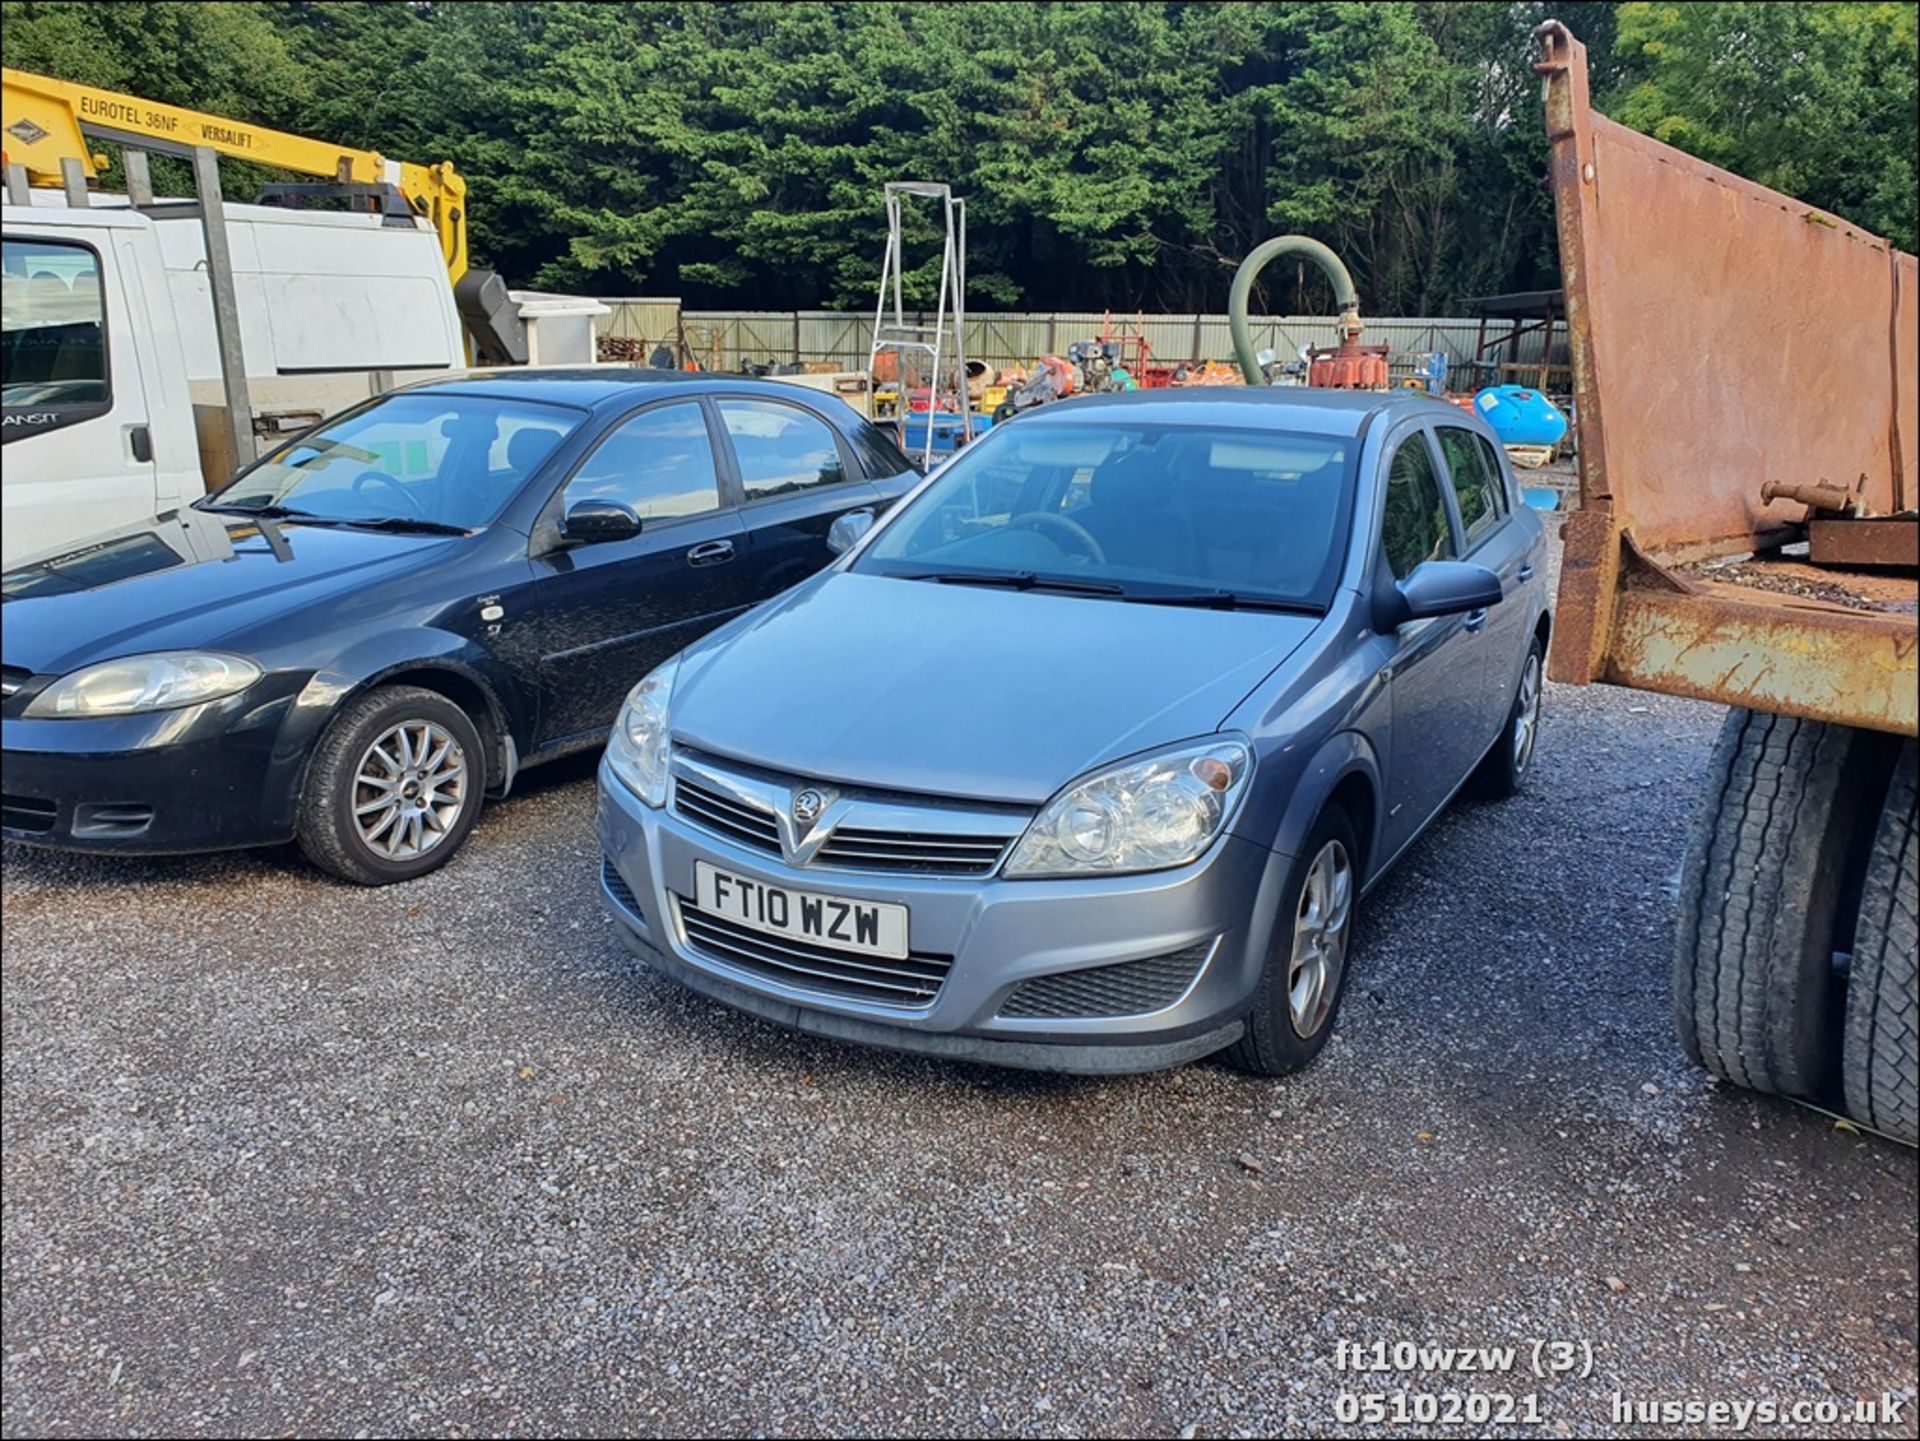 10/10 VAUXHALL ASTRA CLUB - 1364cc 5dr Hatchback (Silver, 83k) - Image 2 of 12